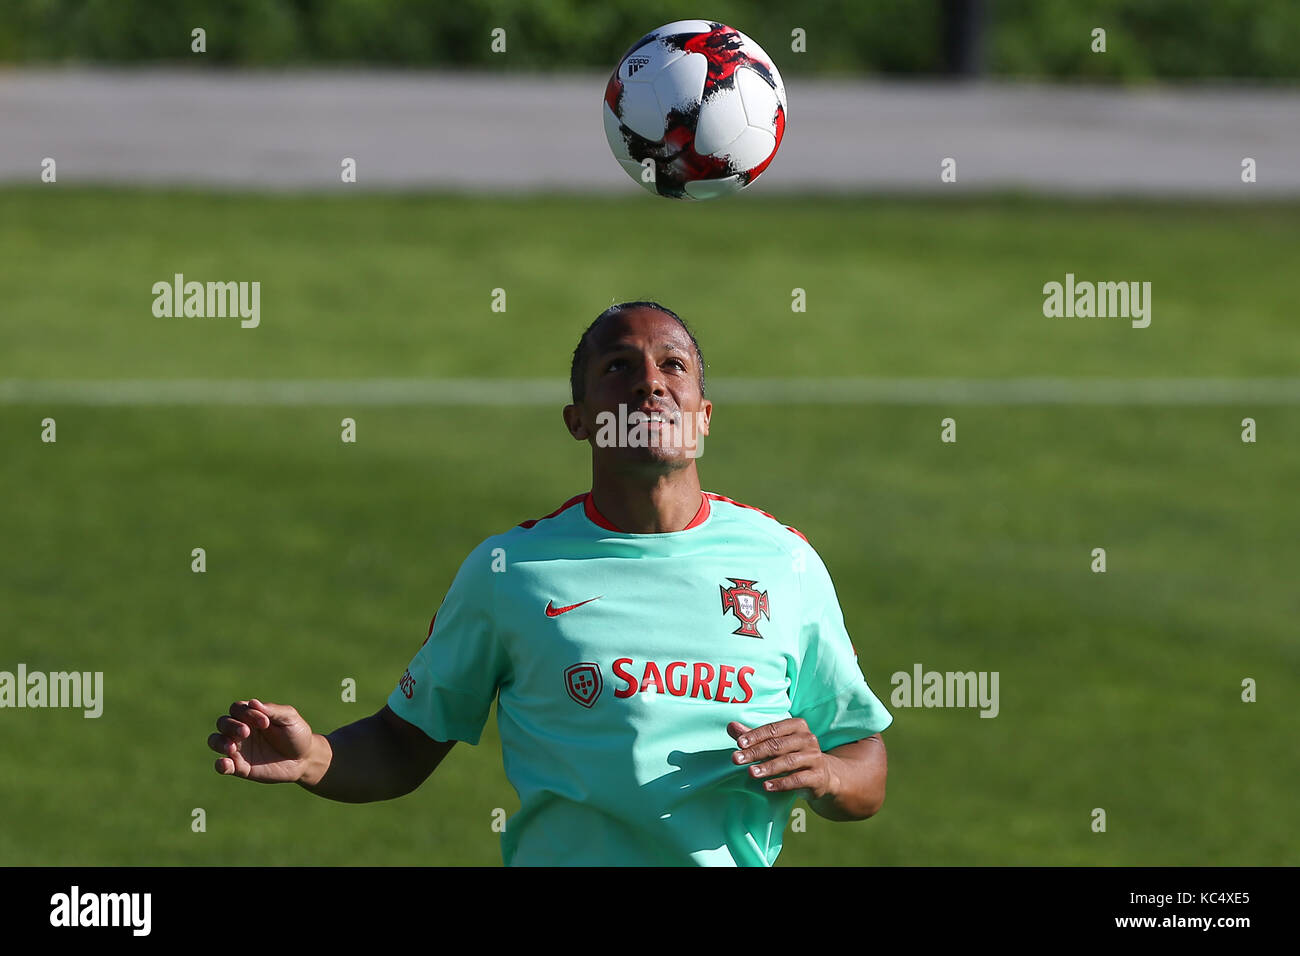 Lisbon, Portugal. 3rd Oct, 2017. Portugal's defender Bruno Alves in action during National Team Training session before the match between Portugal and Andorra at City Football in Oeiras, Lisbon on October 3, 2017. Credit: Bruno Barros/Alamy Live News Stock Photo